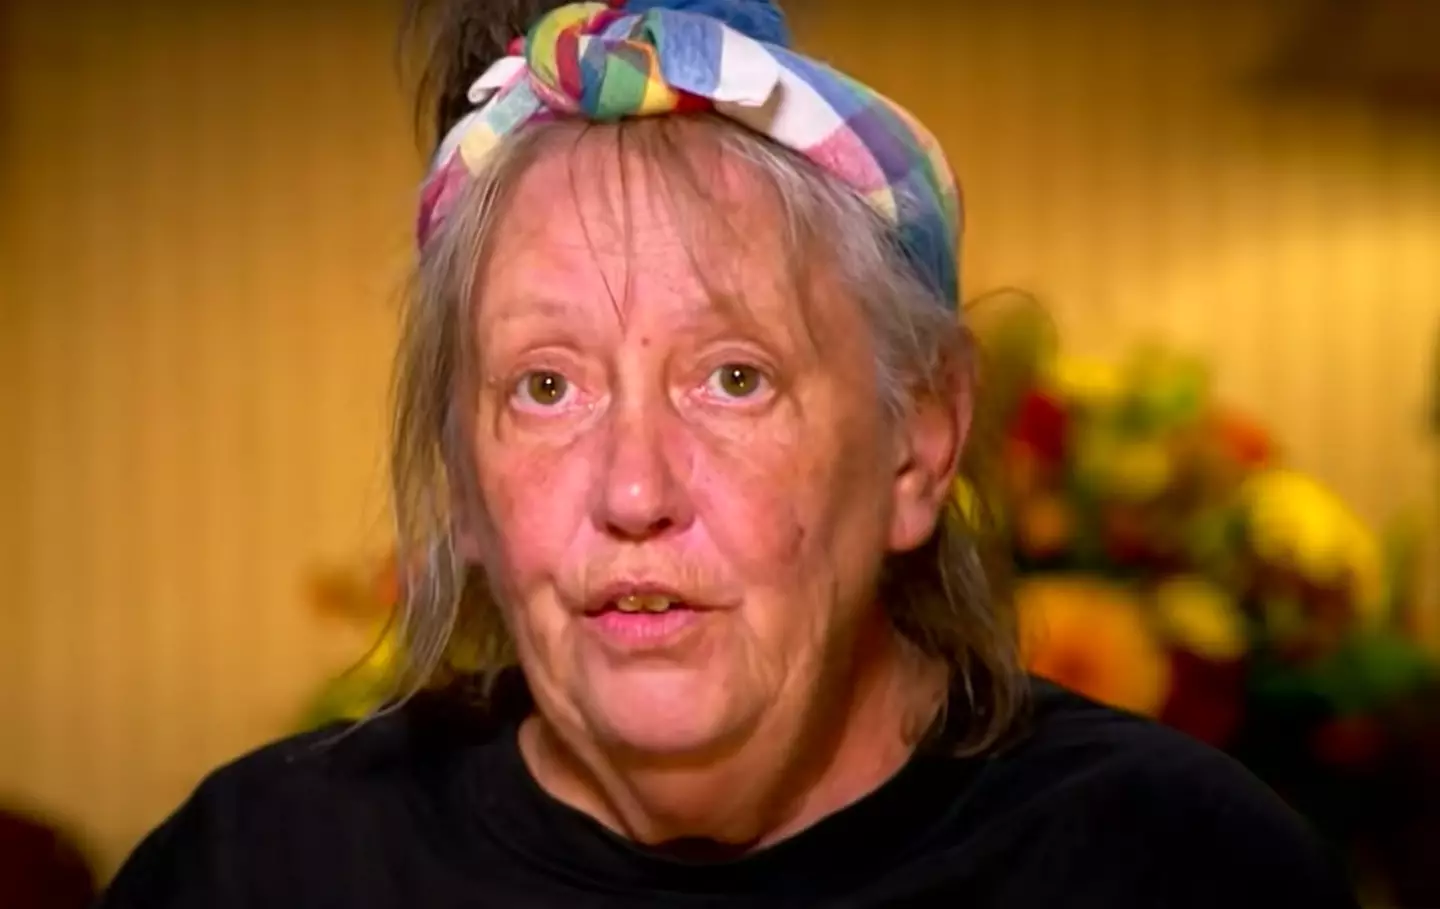 Shelley Duvall's interview on Dr Phil drew lots of criticism.